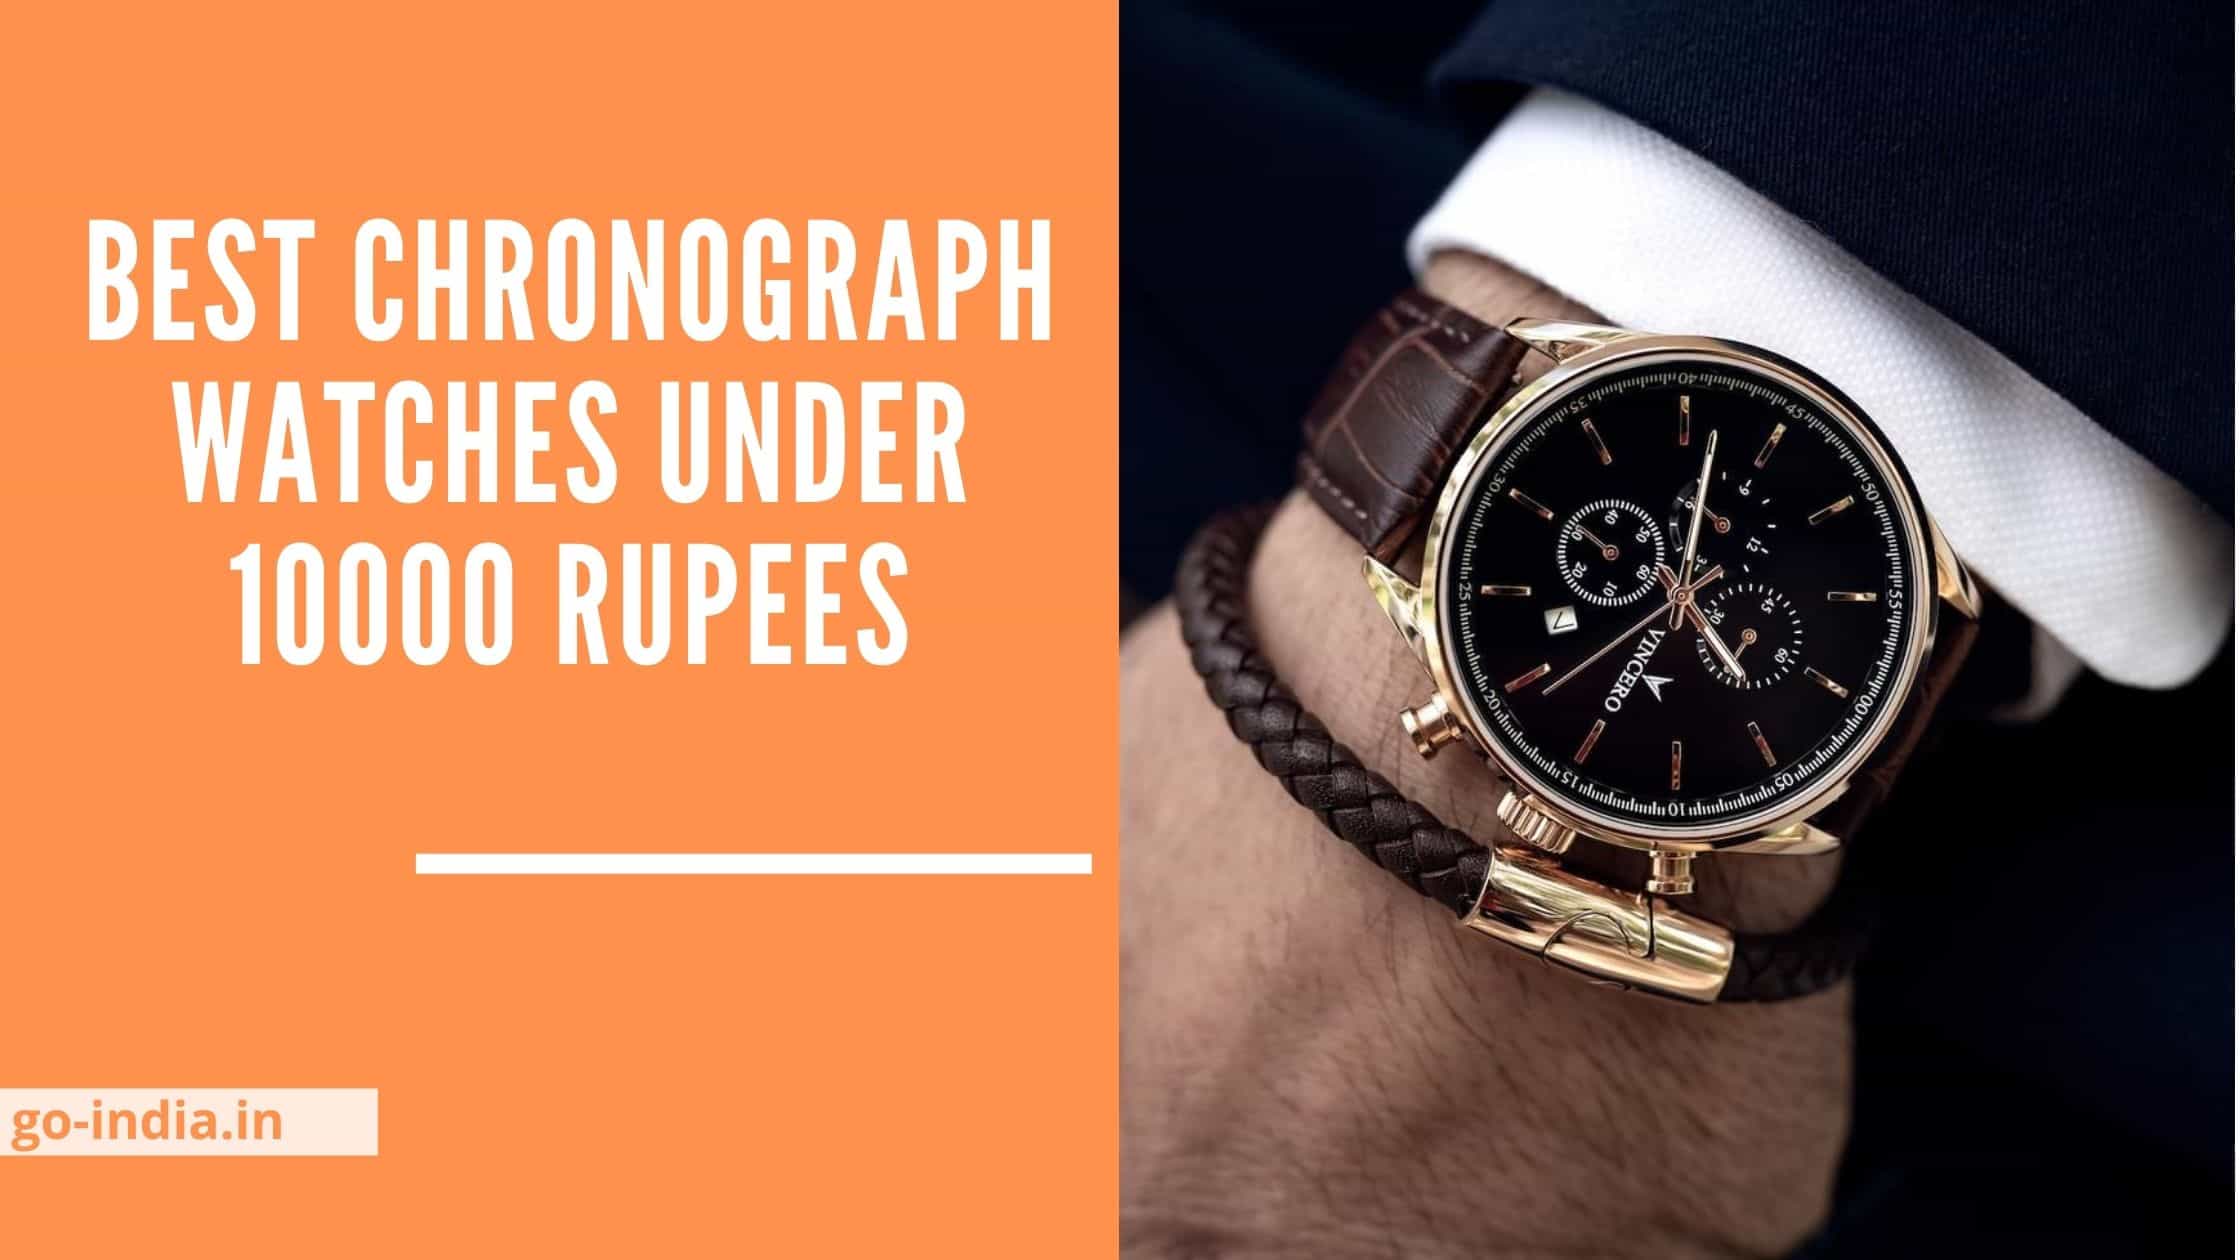 Top 10 Best Chronograph Watches Under 10000 Rupees in India 2022